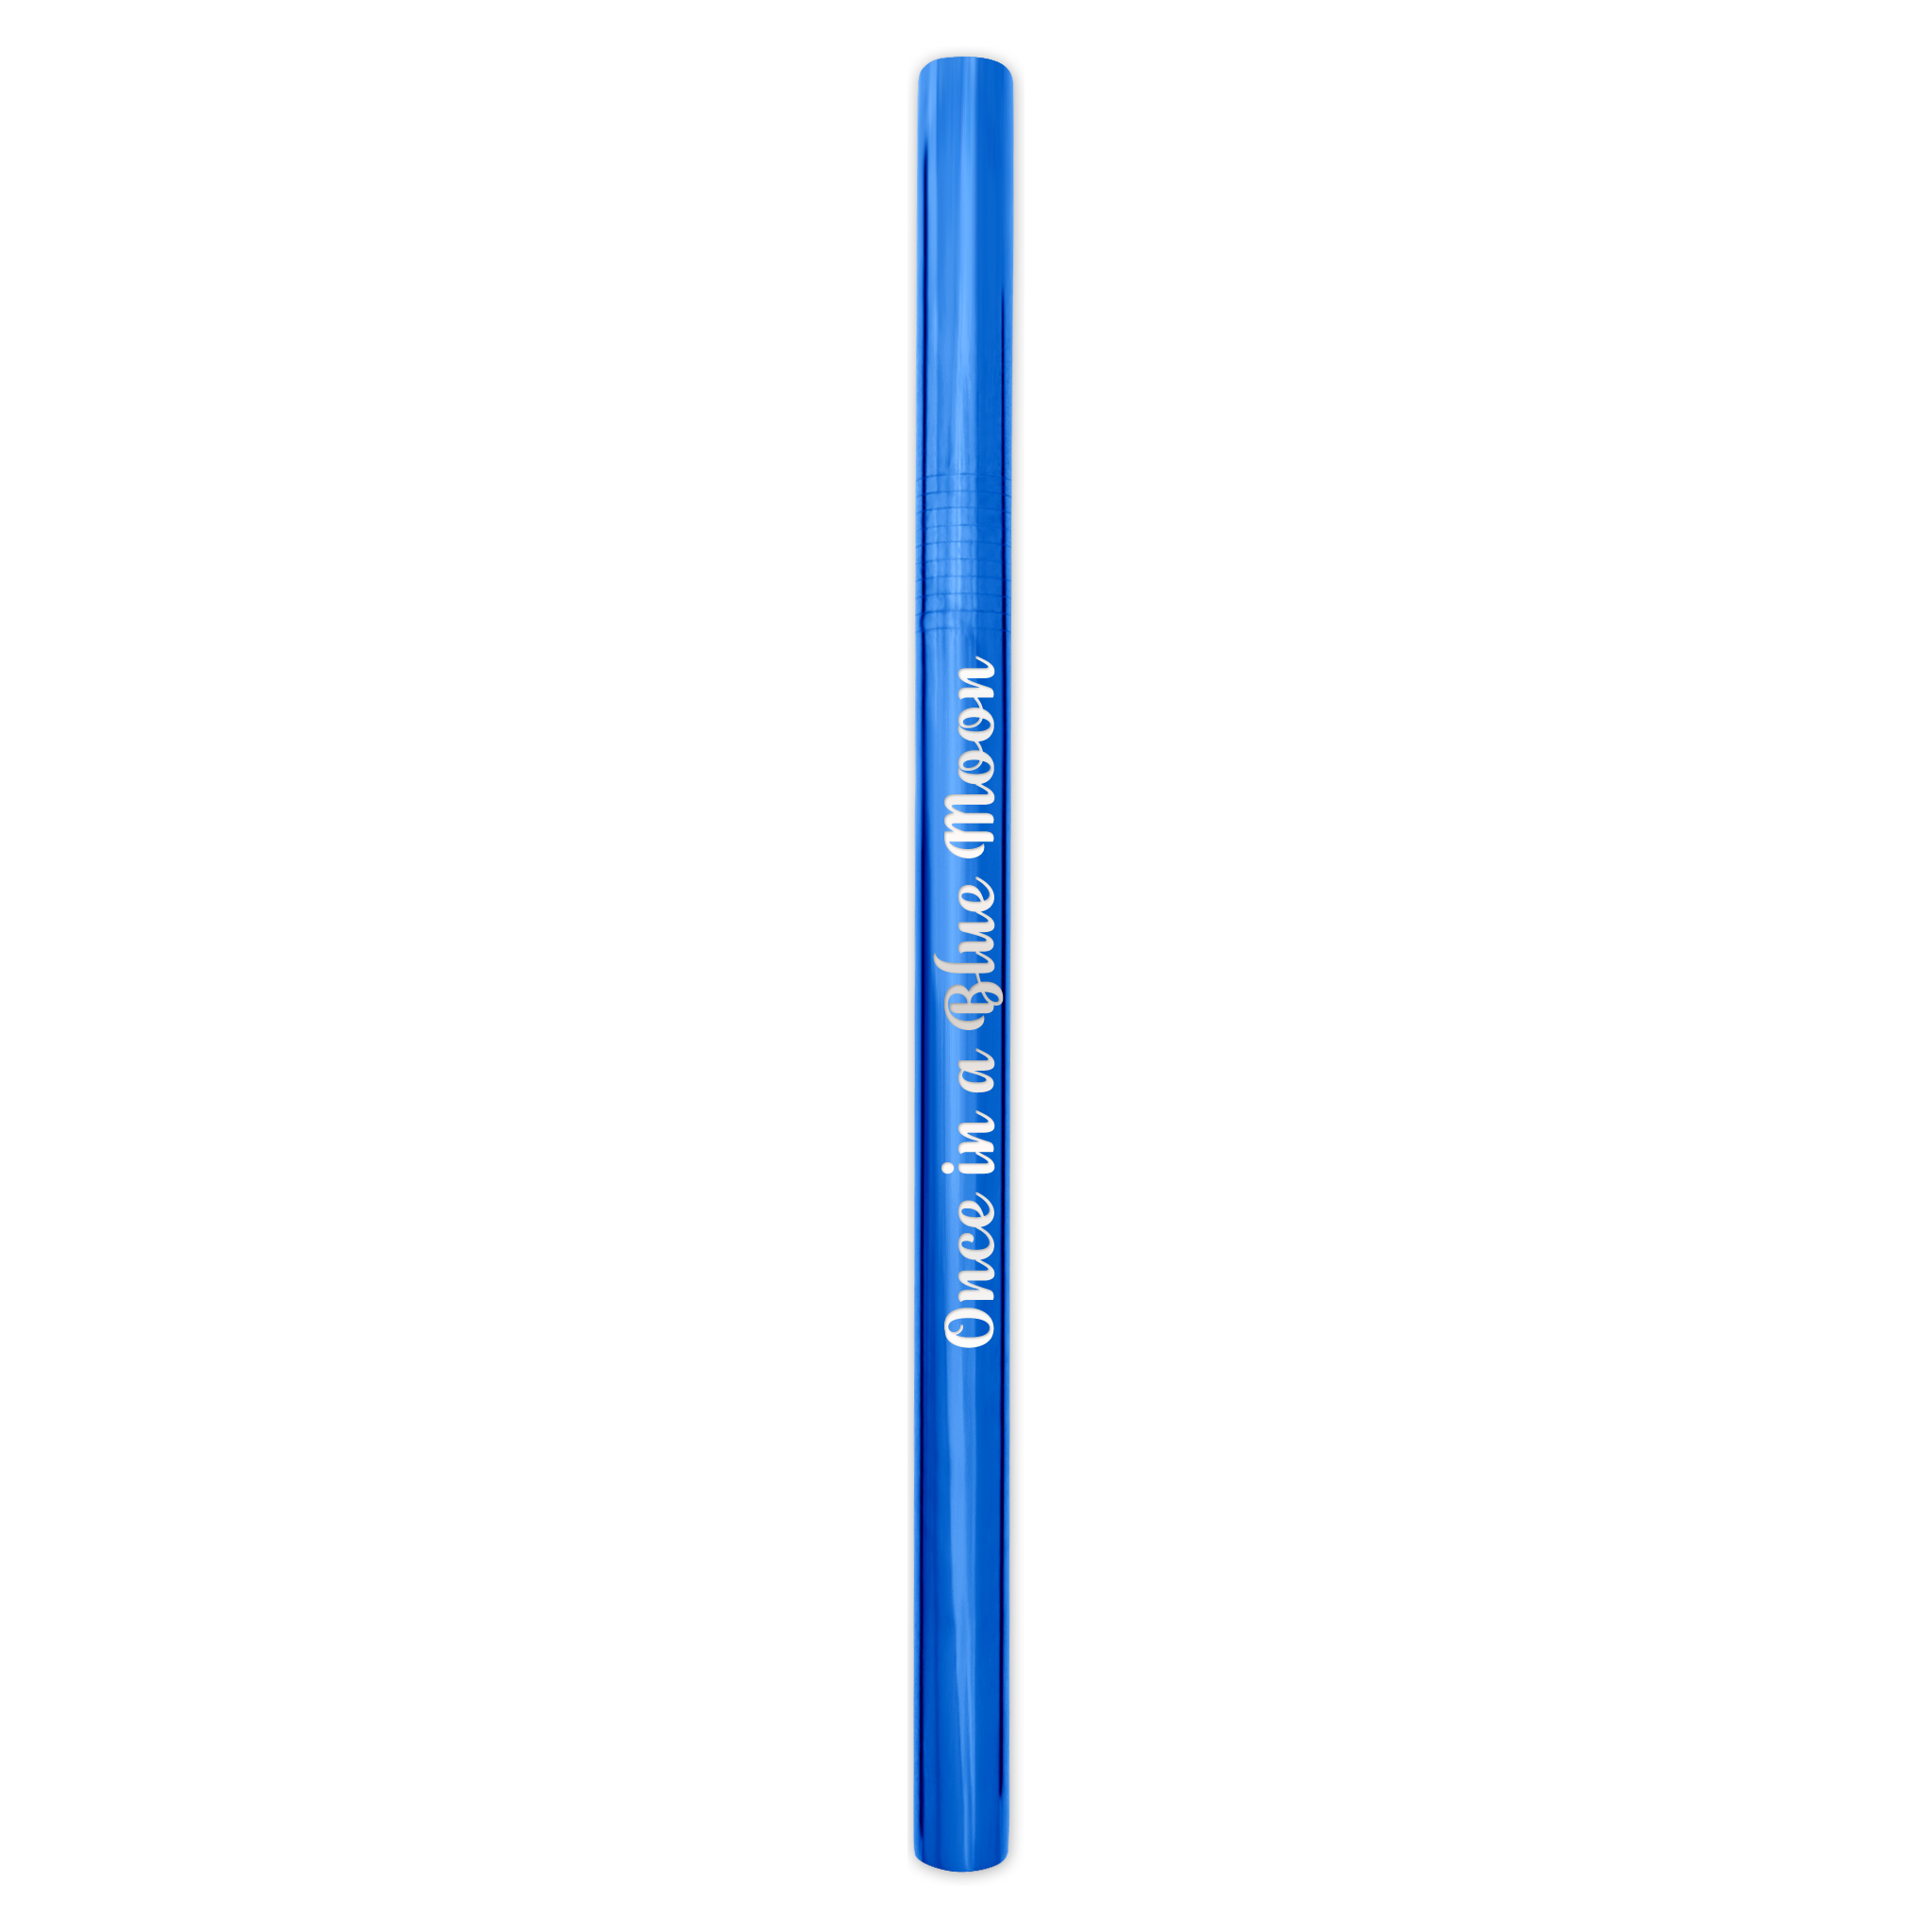 Reusable Stainless Steel Smoothie Straw (Blue)